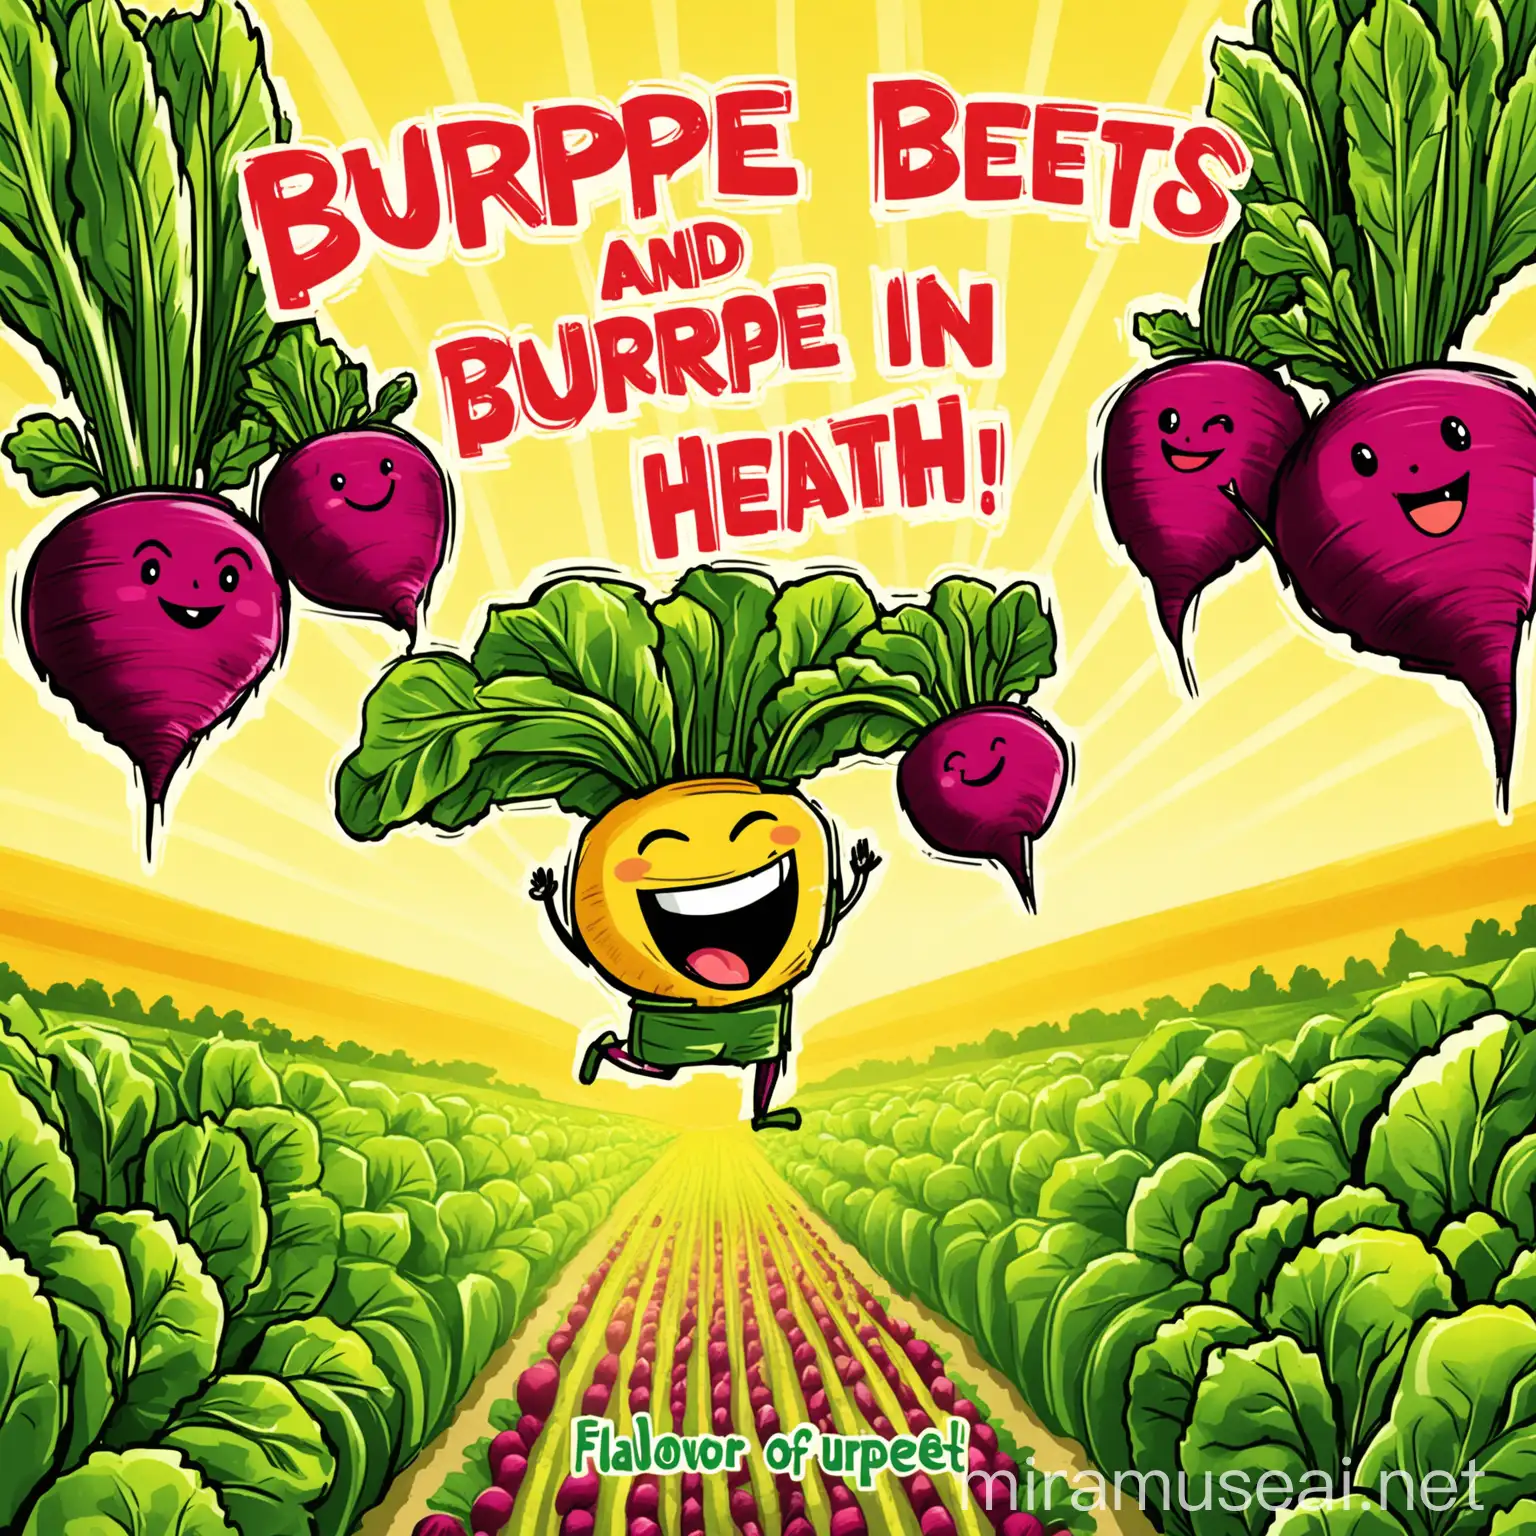 Vibrant Yellow Burpee Beets Field Fun and Flavor in Every Bite